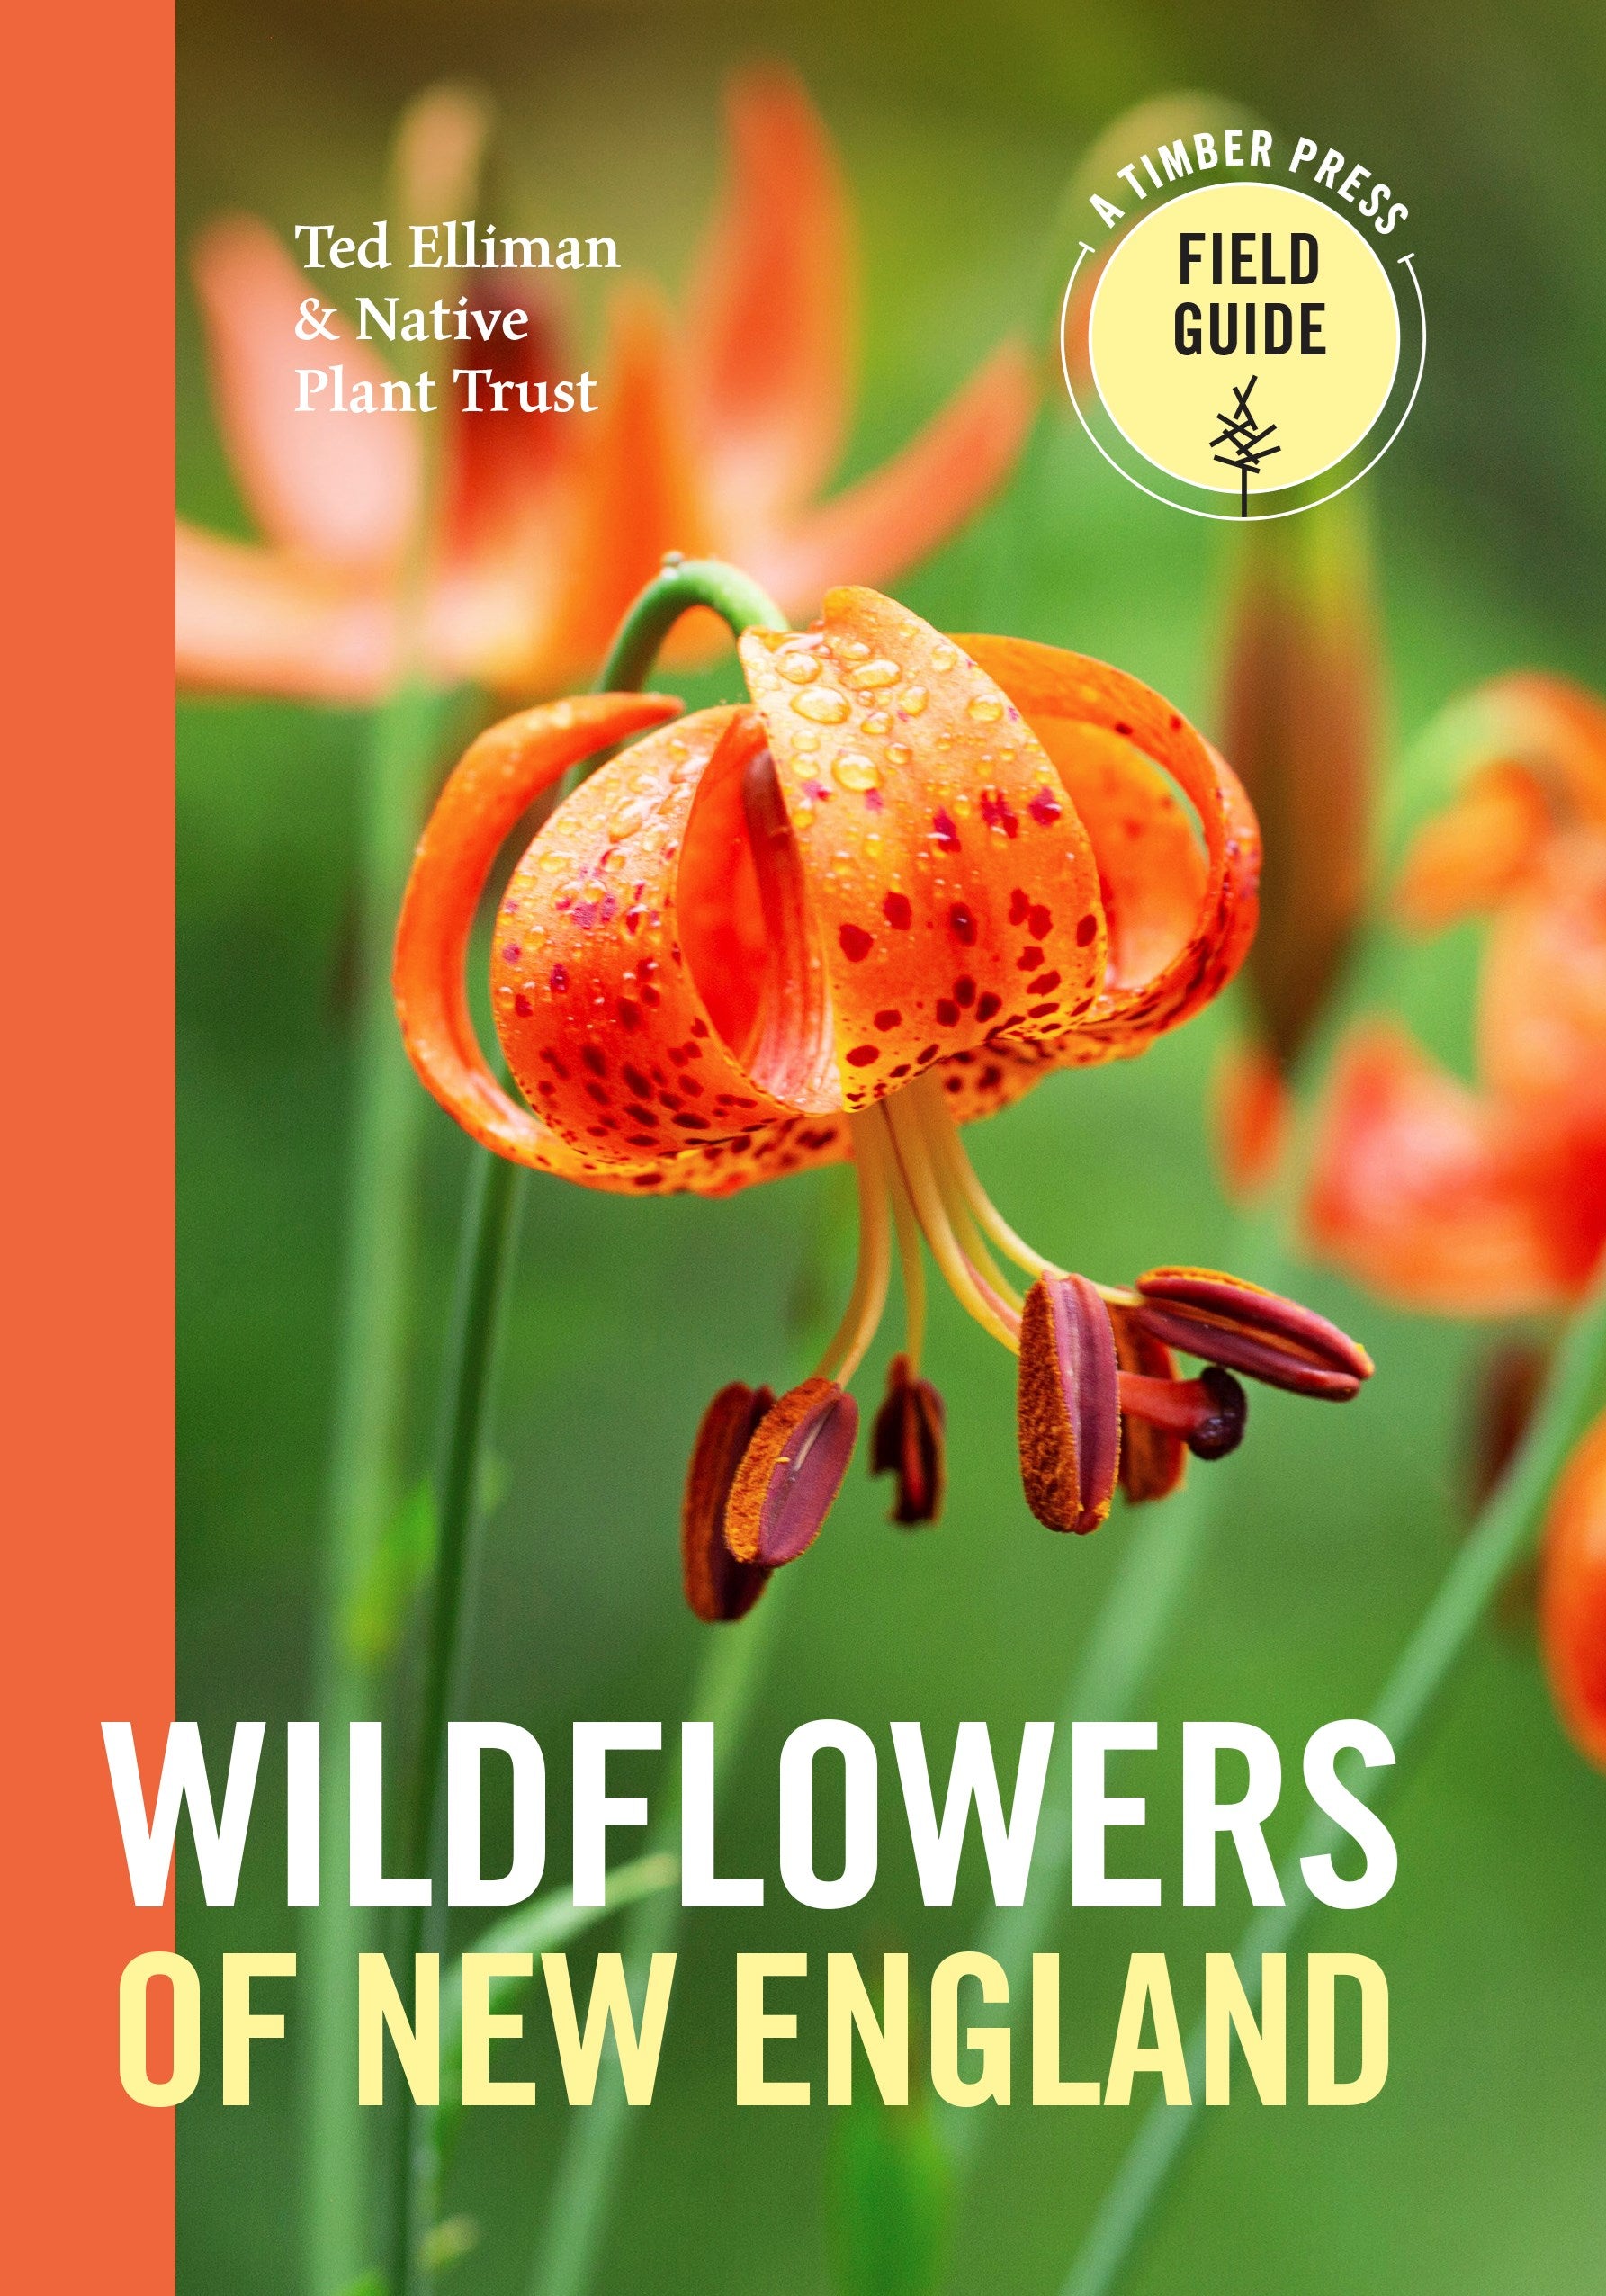 Wildflowers of New England: Timber Press Field Guide